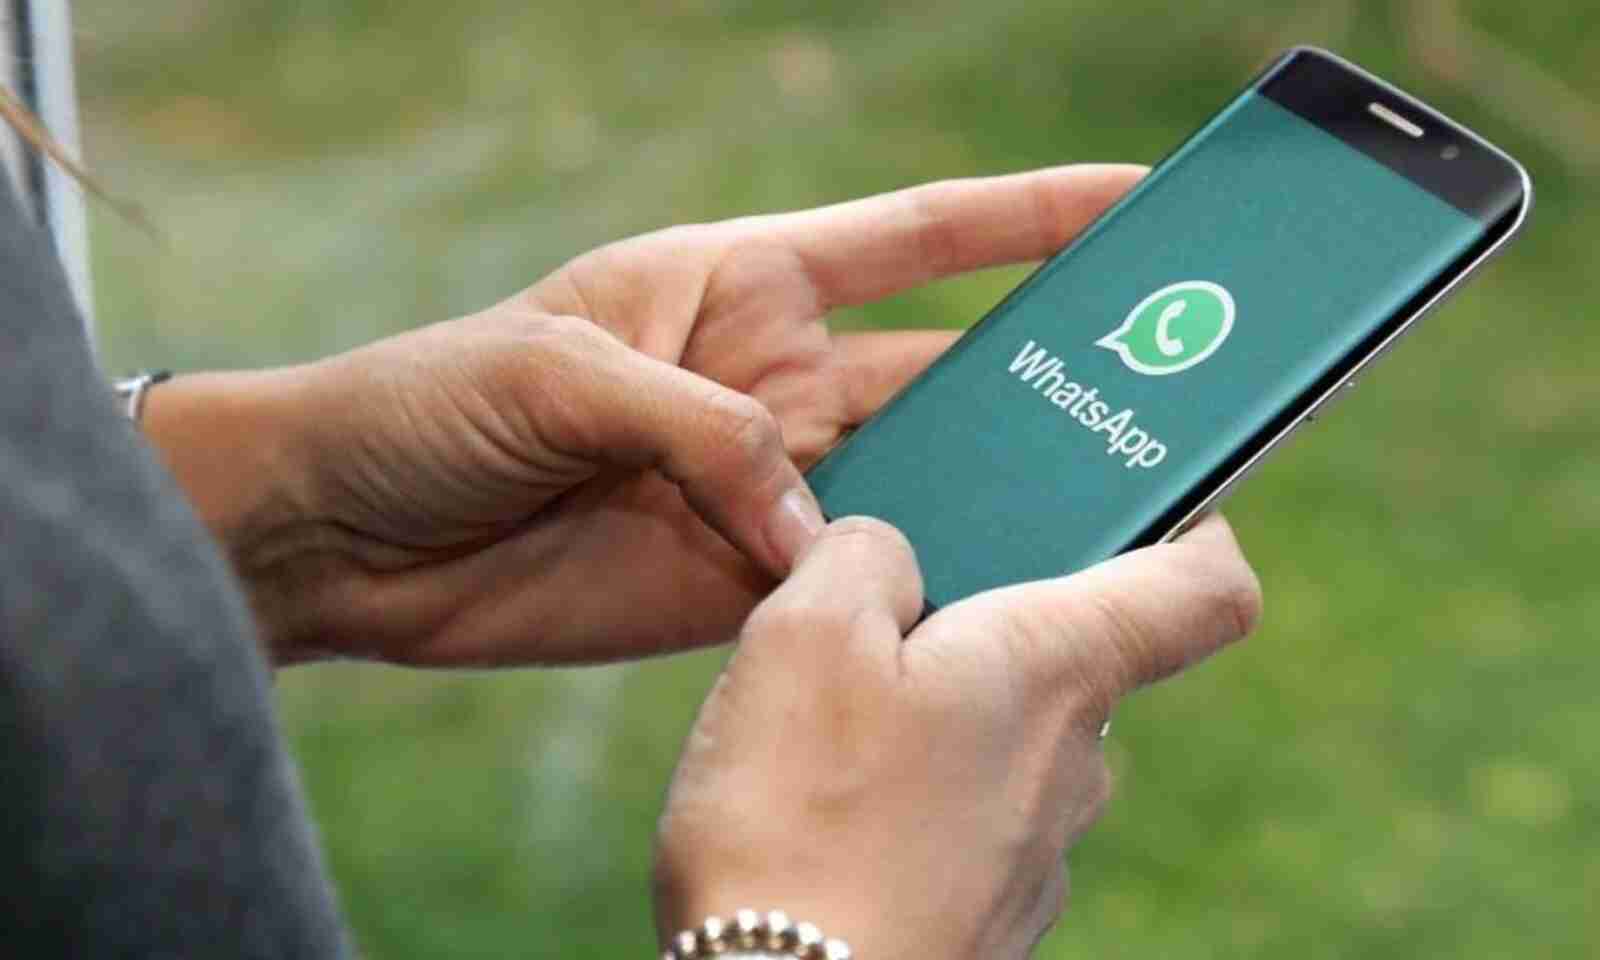 WhatsApp says it banned more than 2 million accounts in one month